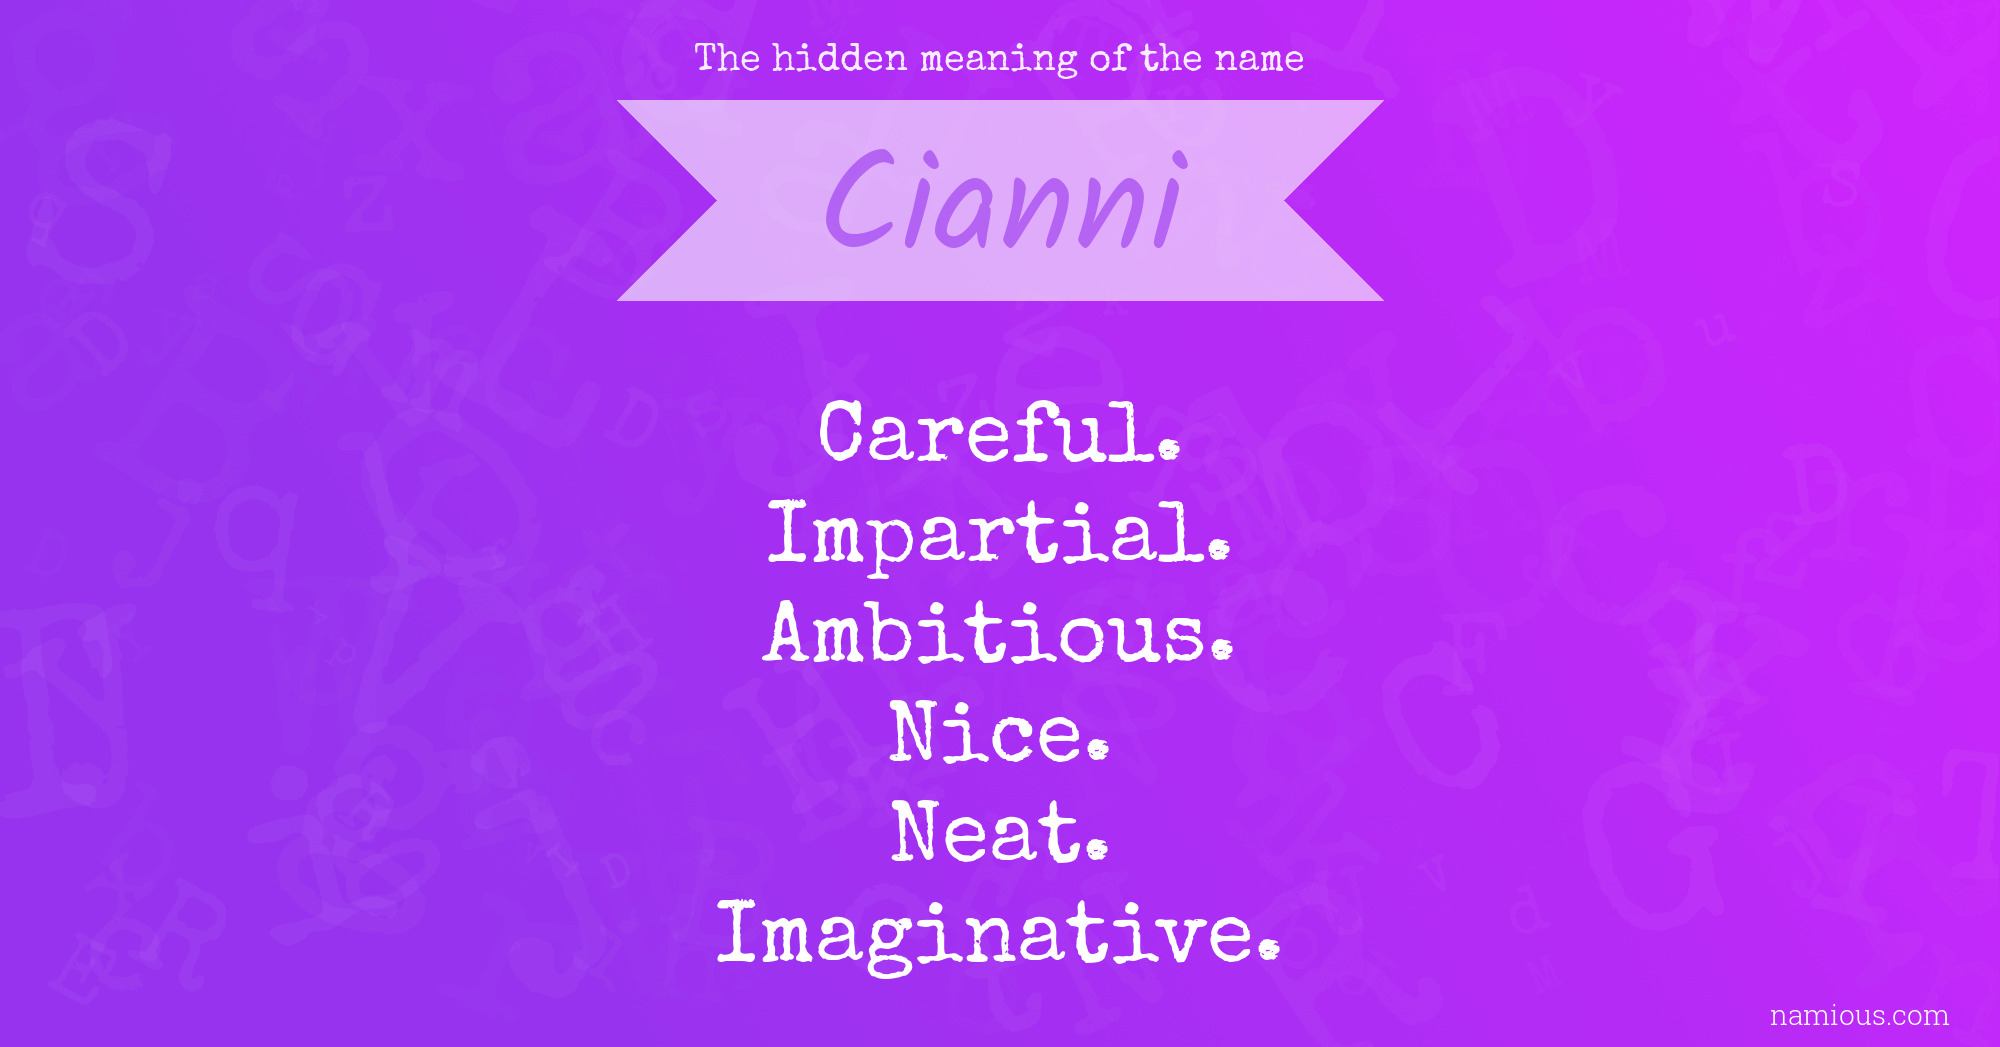 The hidden meaning of the name Cianni